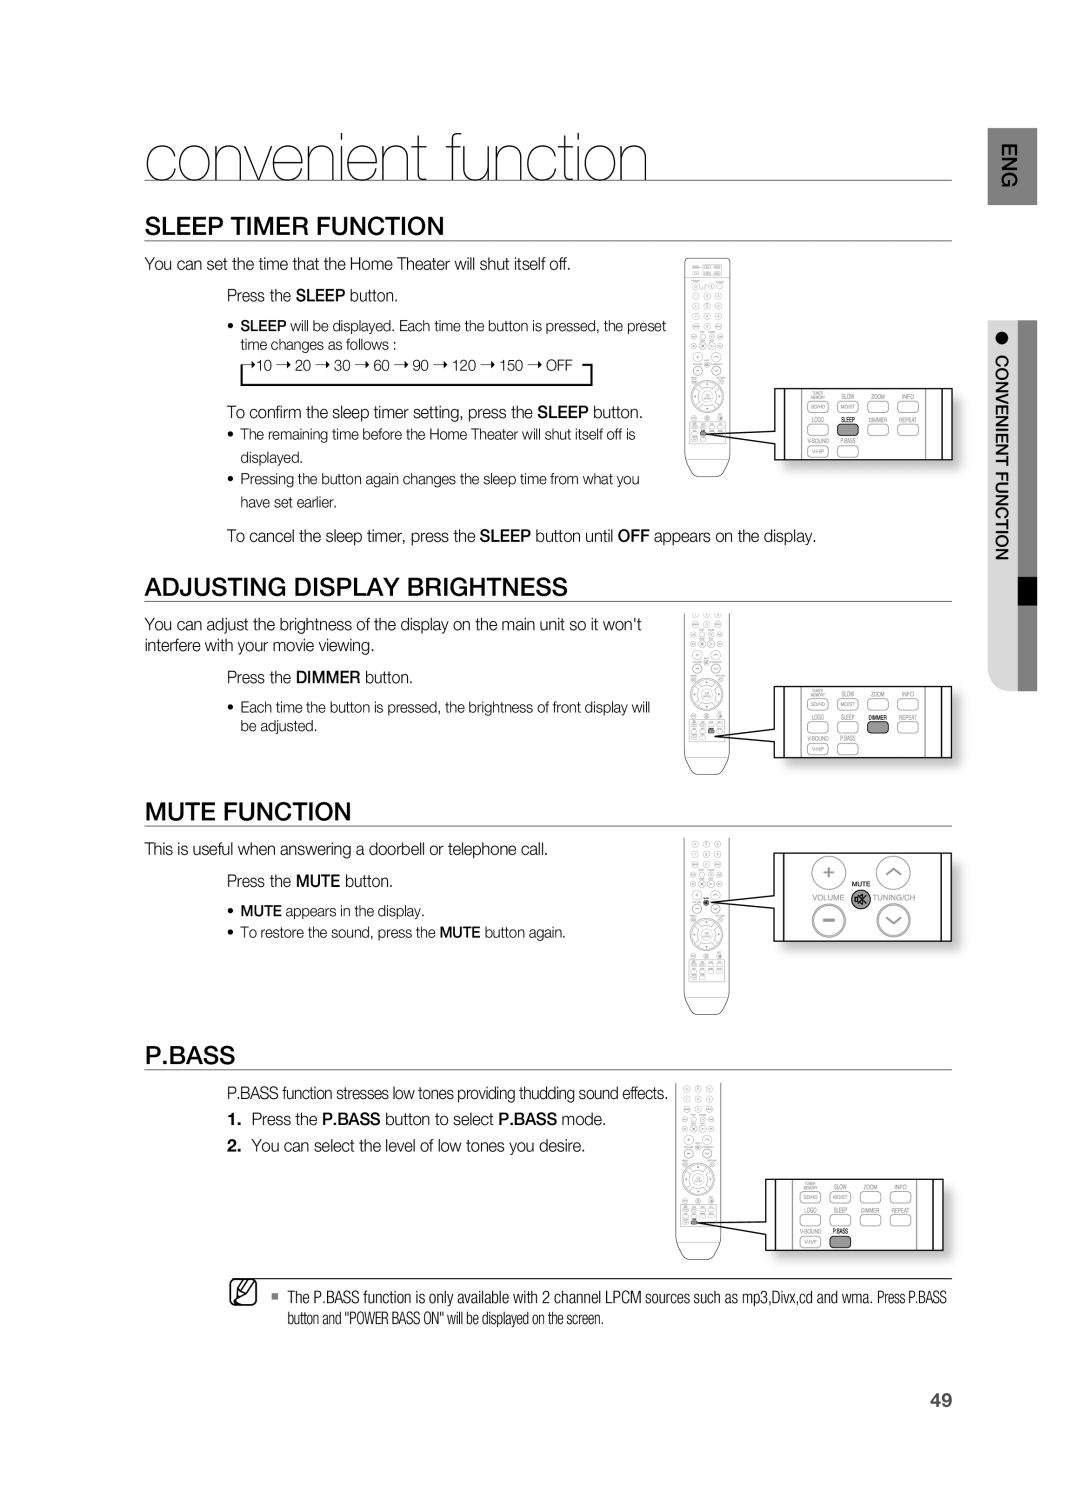 Samsung HT-A100 user manual convenient function, SlEEP TIMEr FUNCTION, ADJUSTINg DISPlAY BrIgHTNESS, Mute Function, P.Bass 